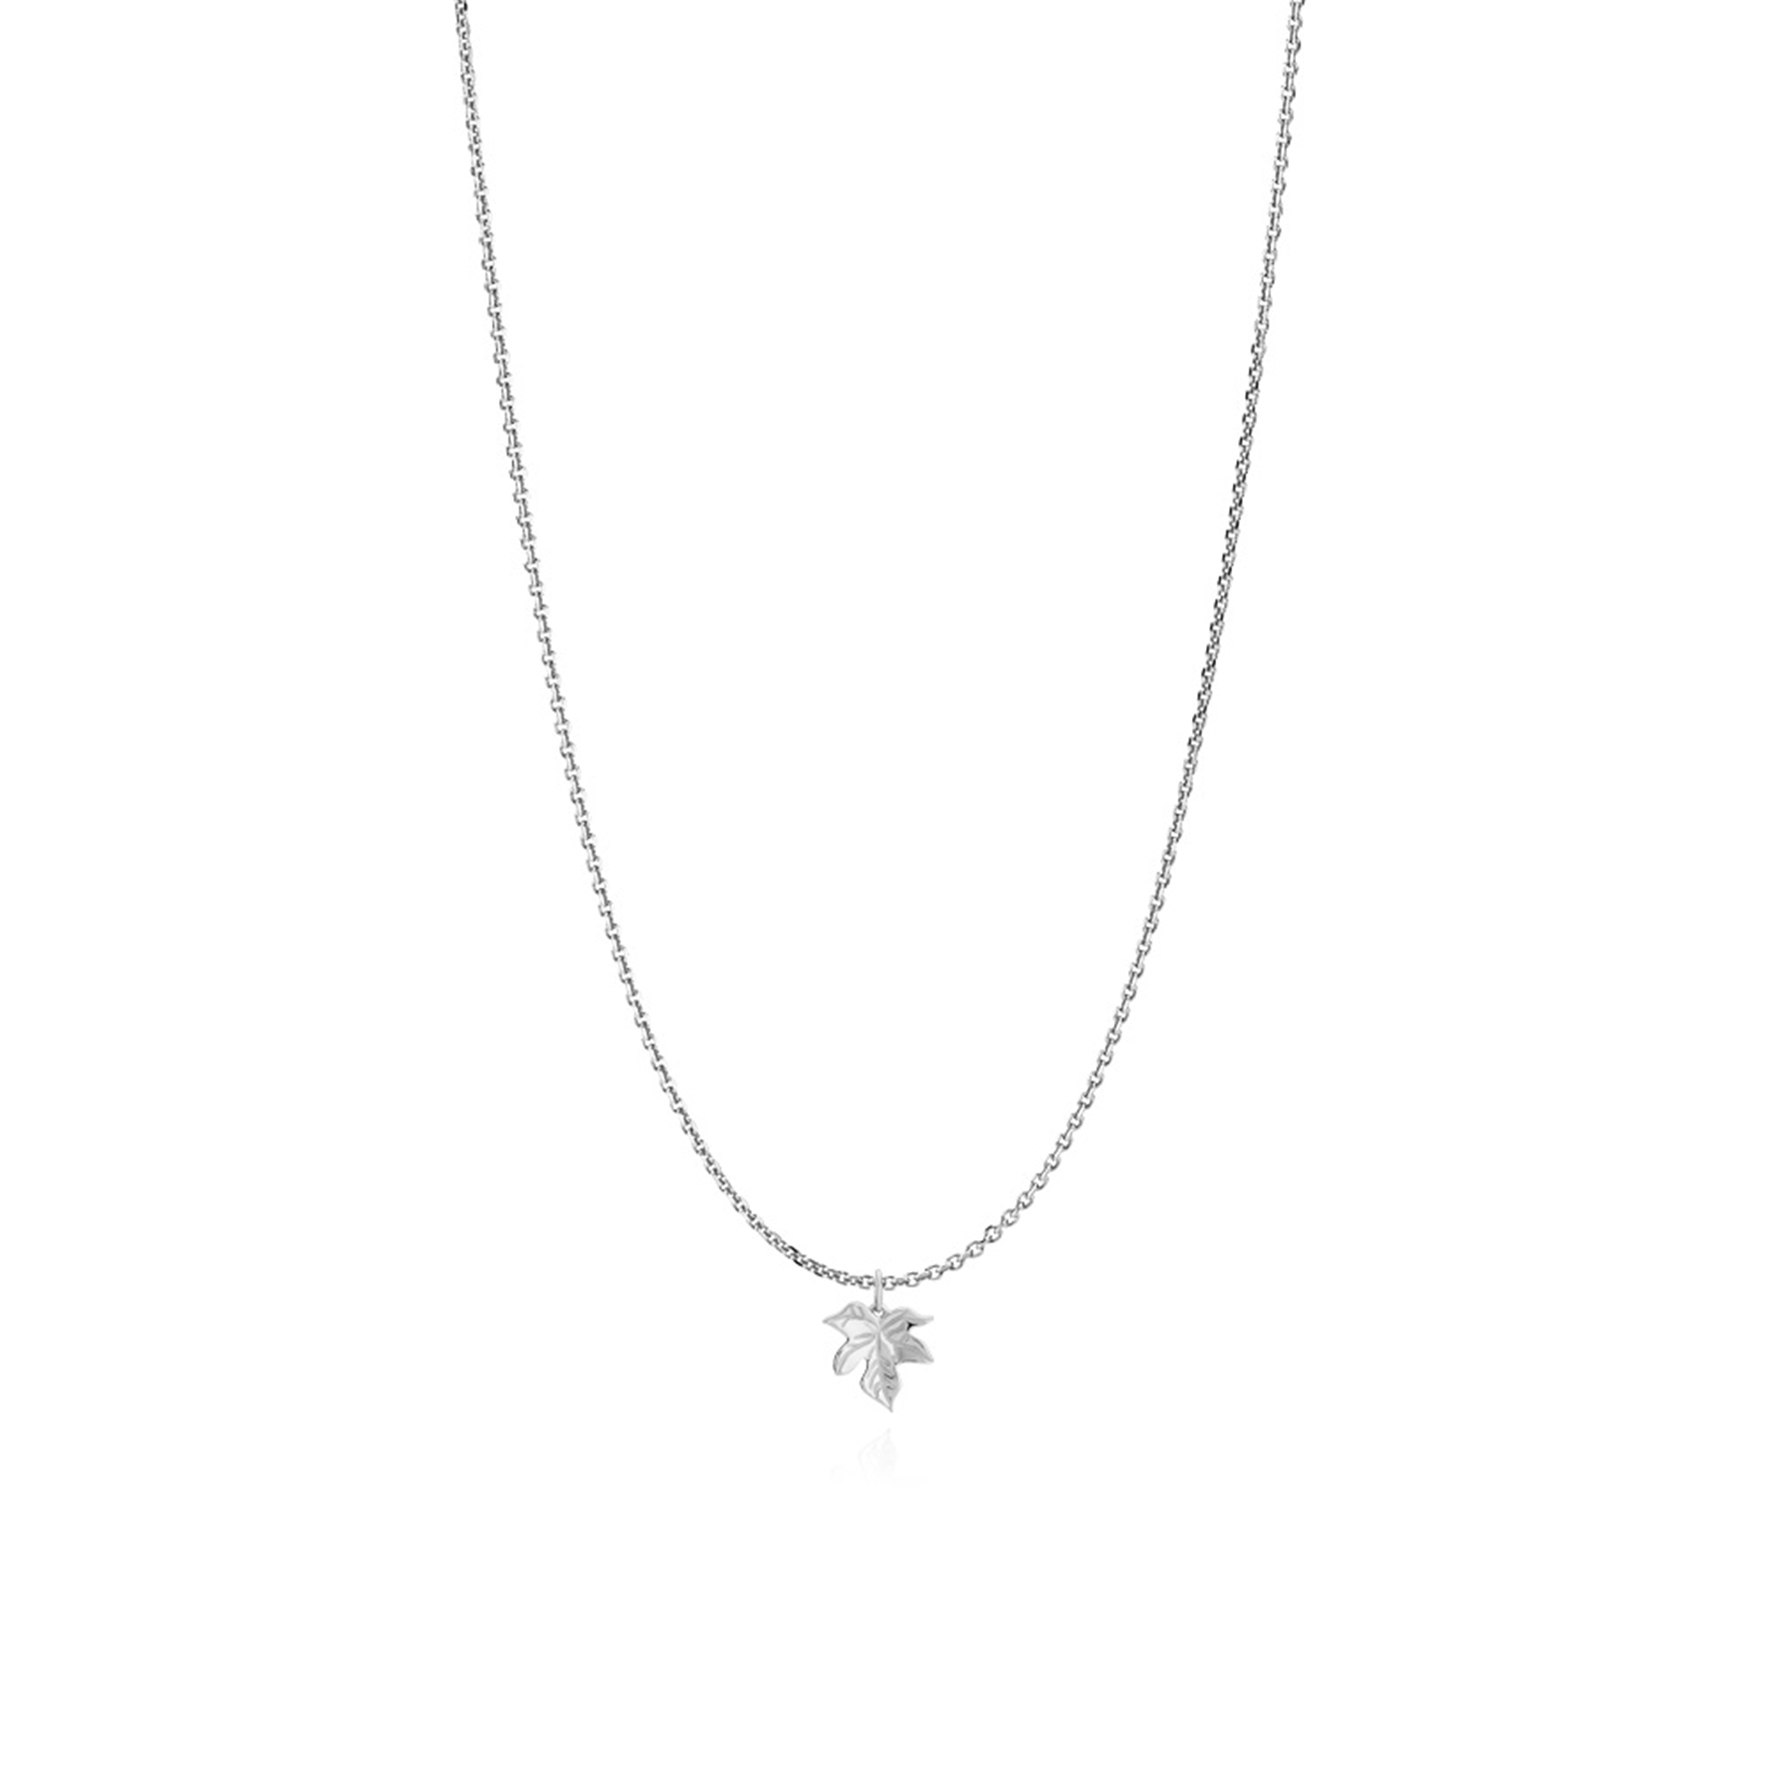 Caley Necklace With Leaf from Izabel Camille in Silver Sterling 925